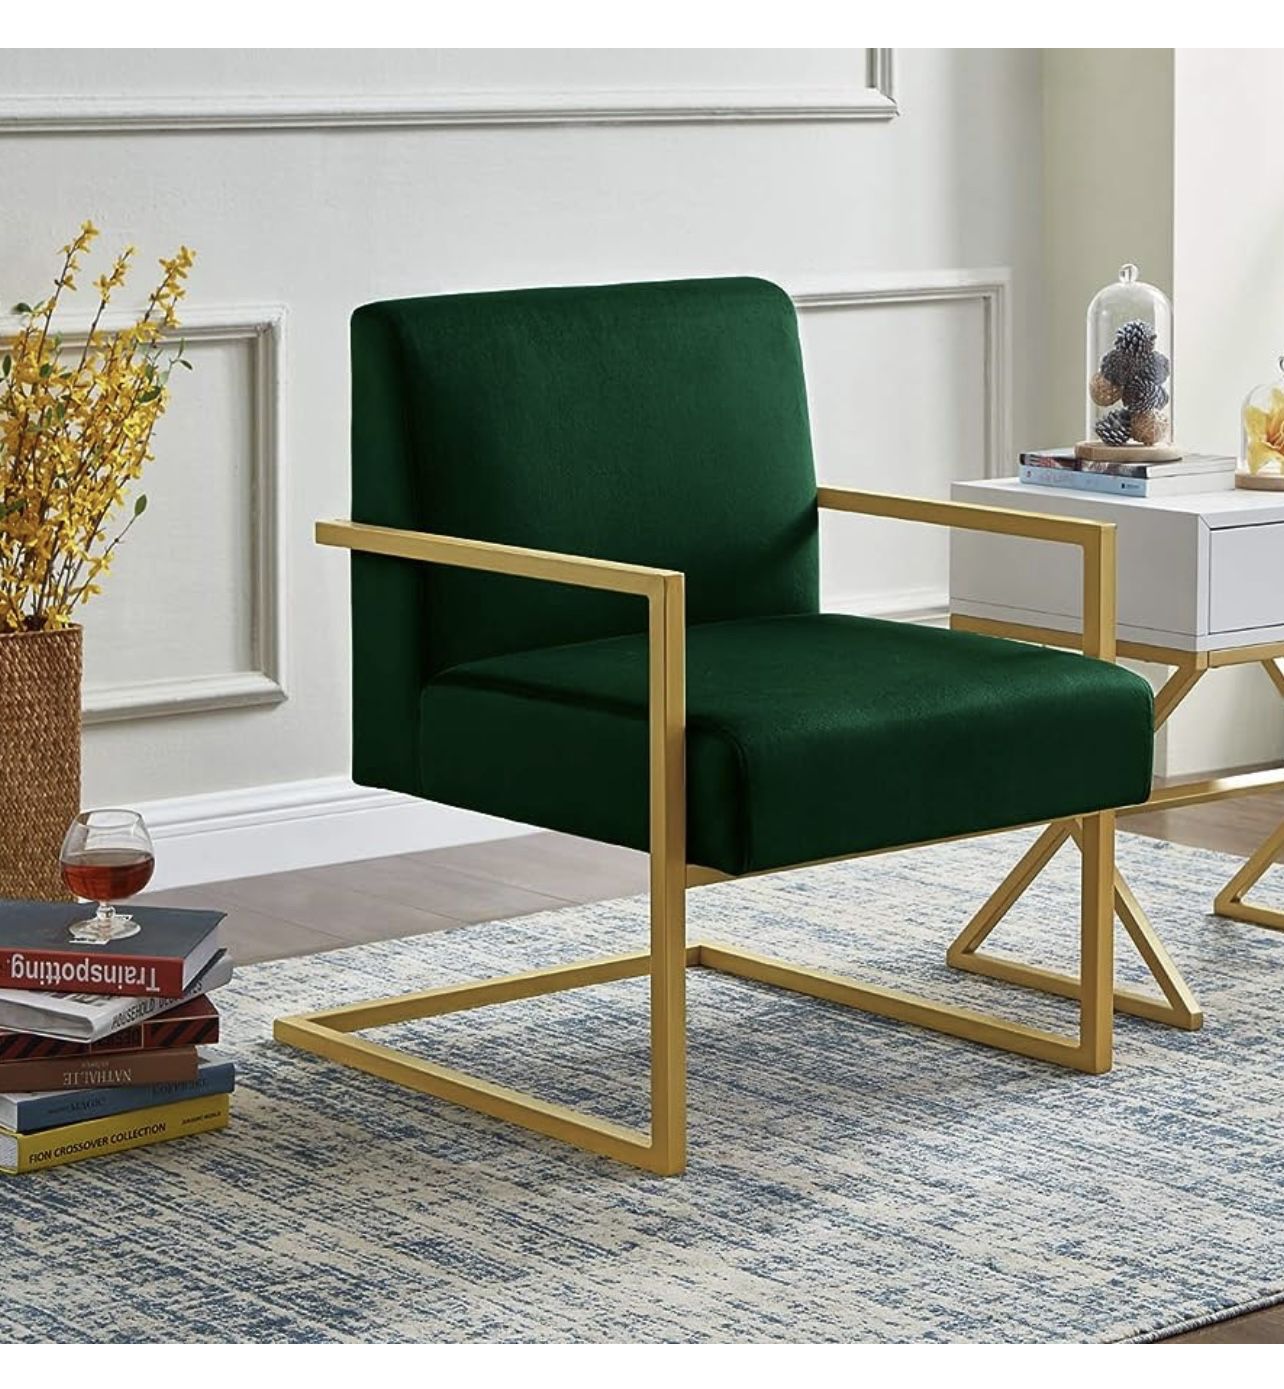 Was 192$ 24KF Comfortable Fashional Accent Chair - Velvet Cushion & Square Arm Metal Golden Stand -Jade